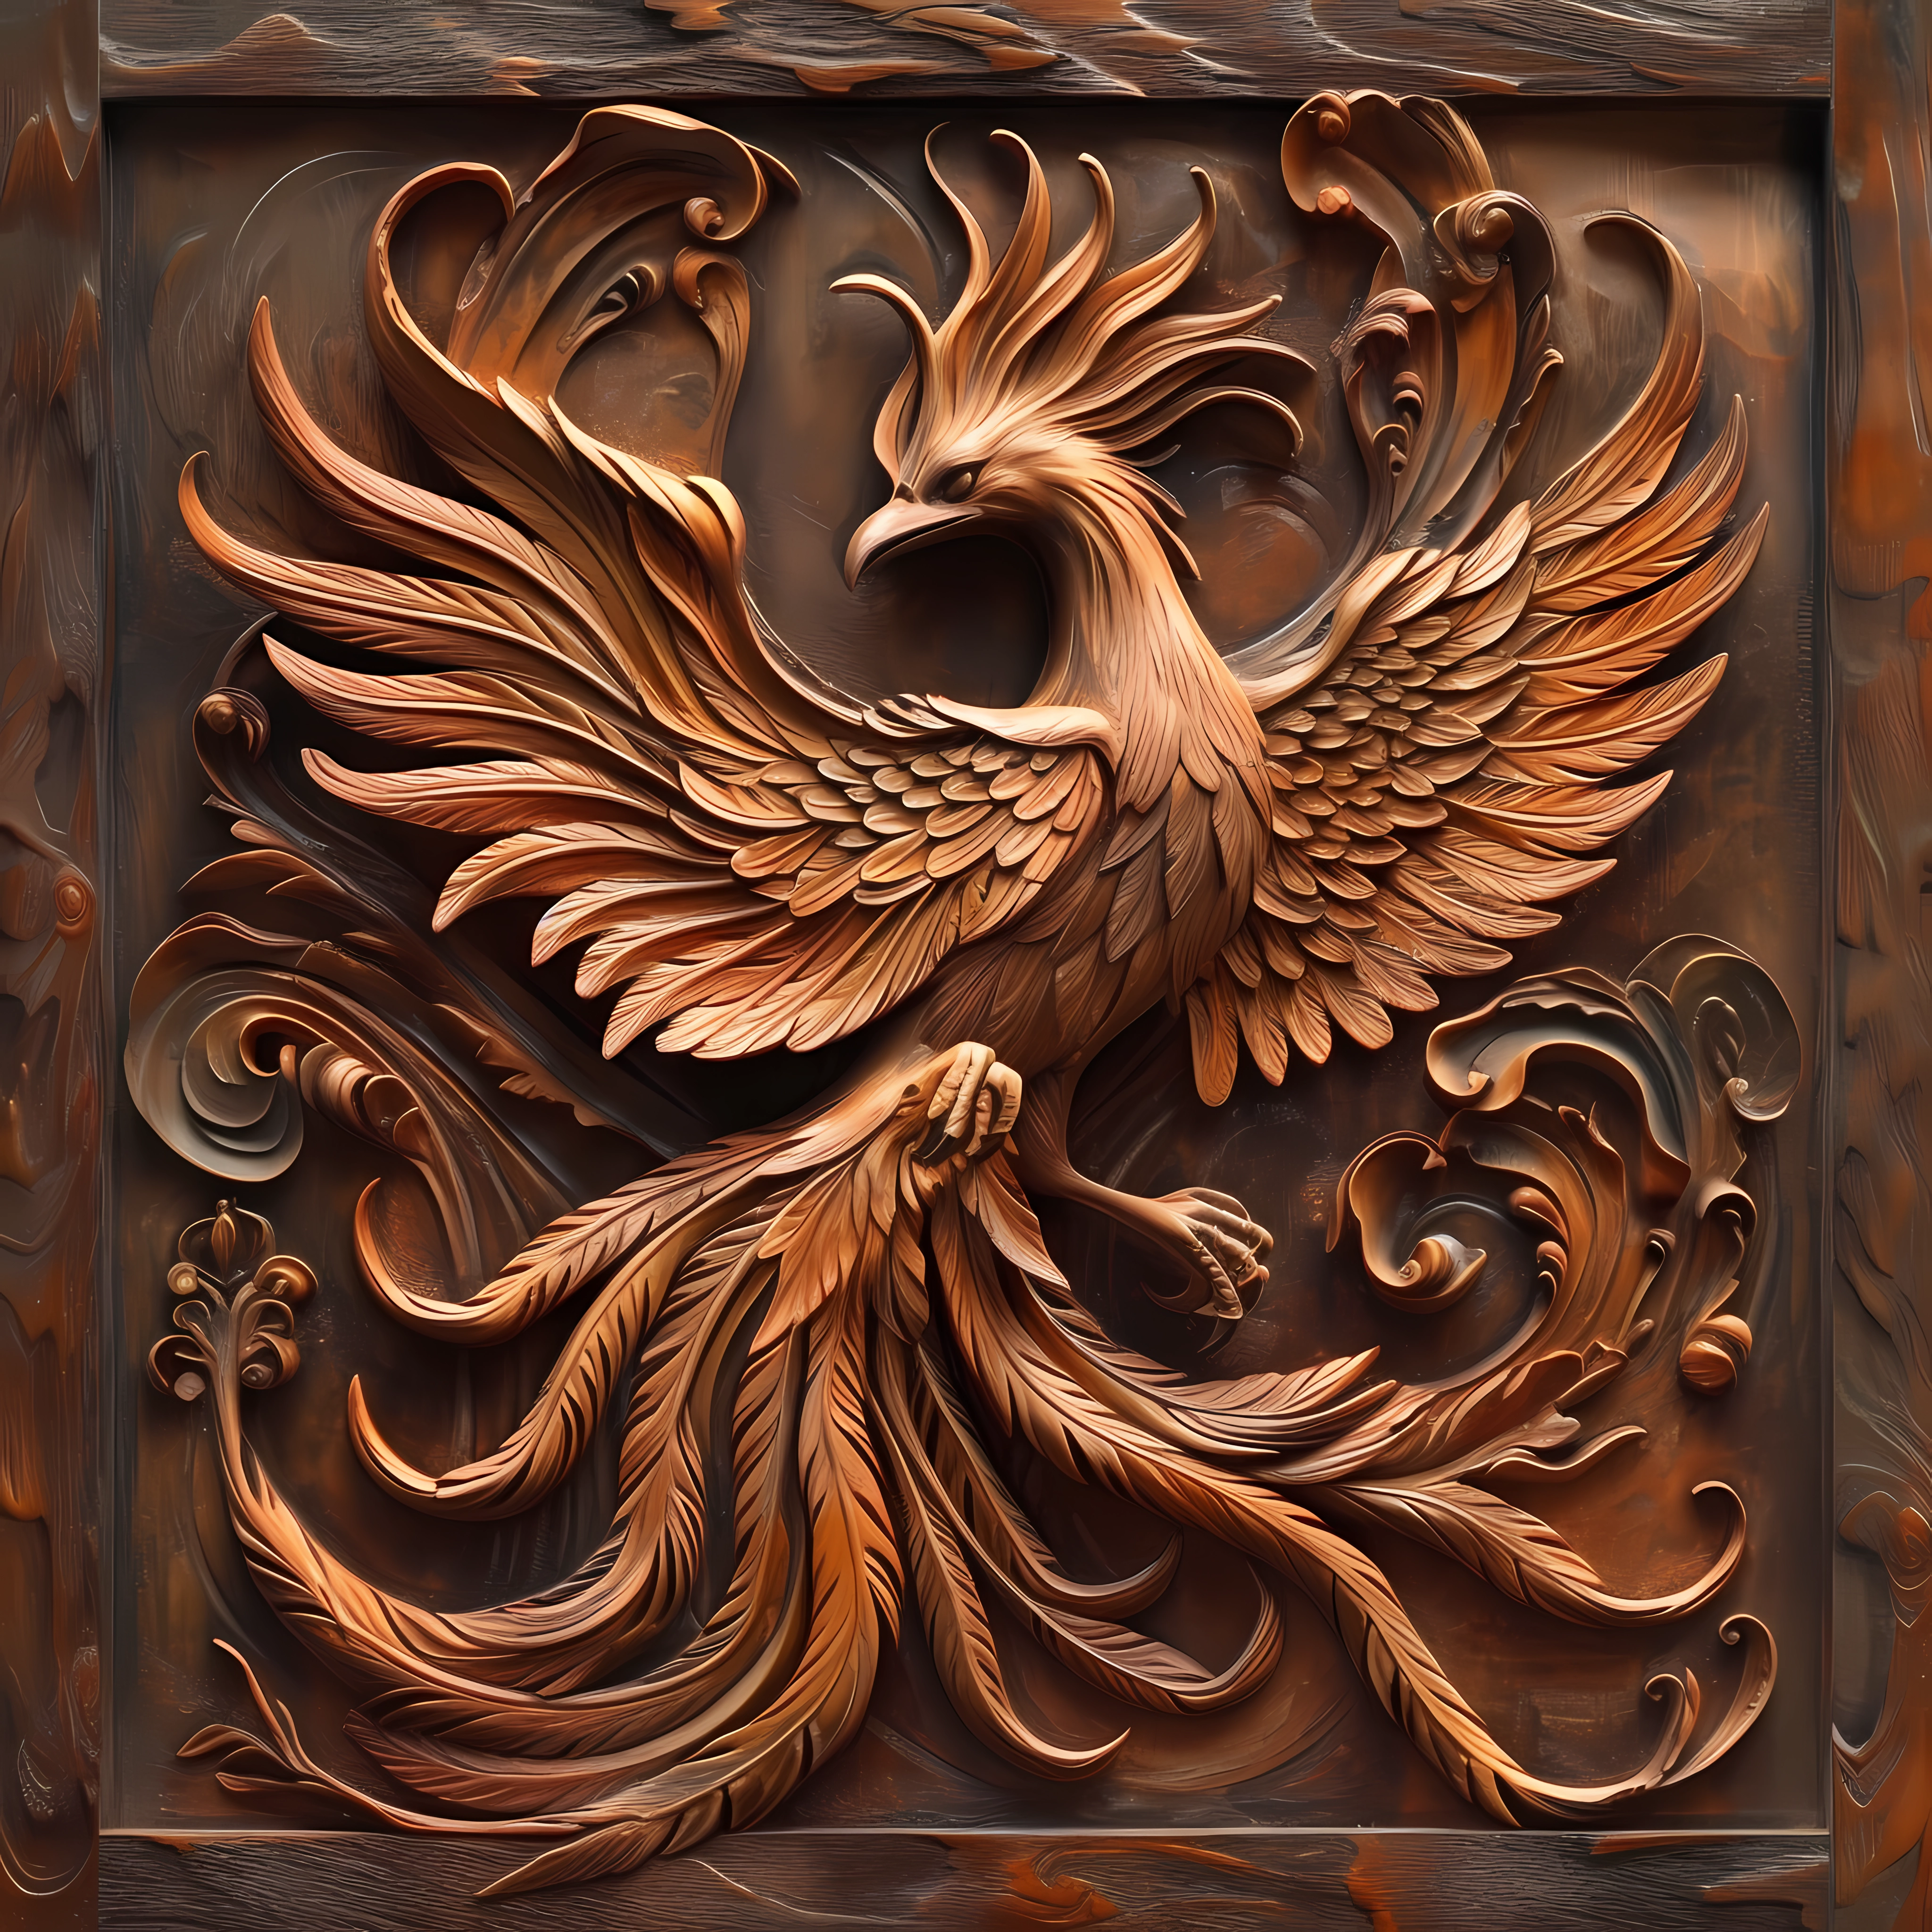 Exquisite wooden carving depicting a phoenix in a mythological style, ideal for use as a detailed and artistic avatar or profile picture.